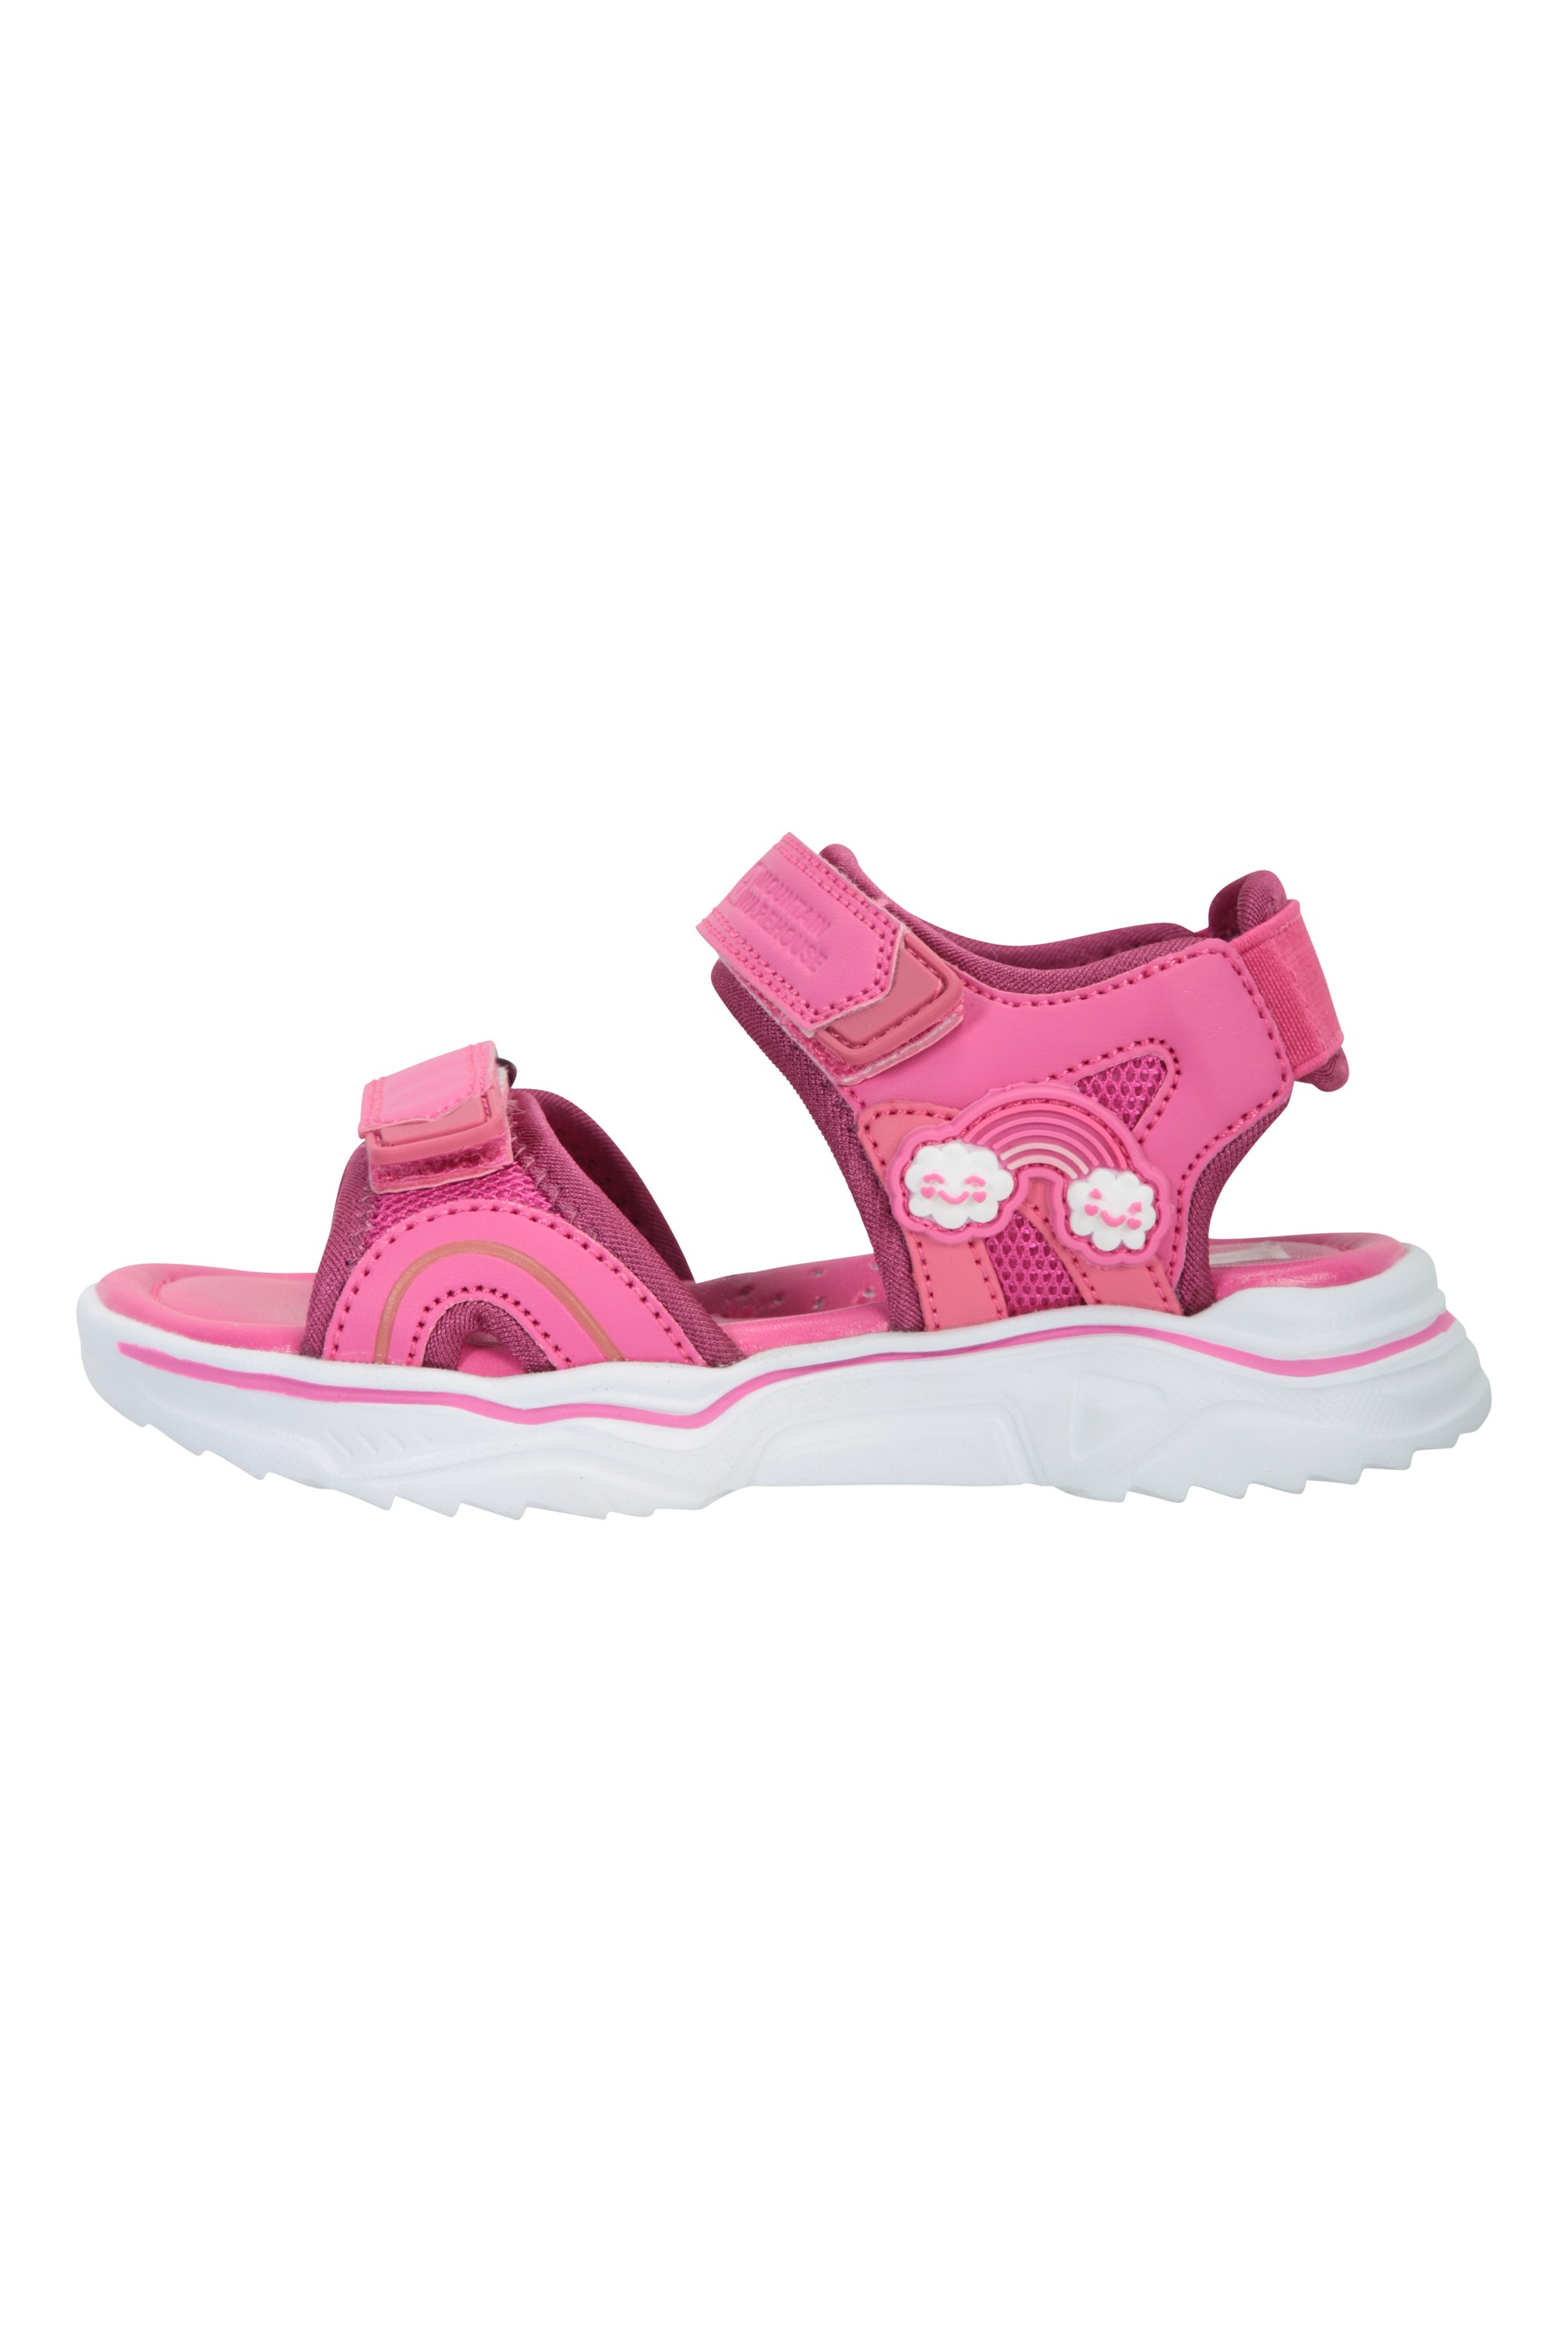 Rugged Bear Hook and Loop Active Sport Sandals (Toddler-Little Kids) at  Tractor Supply Co.